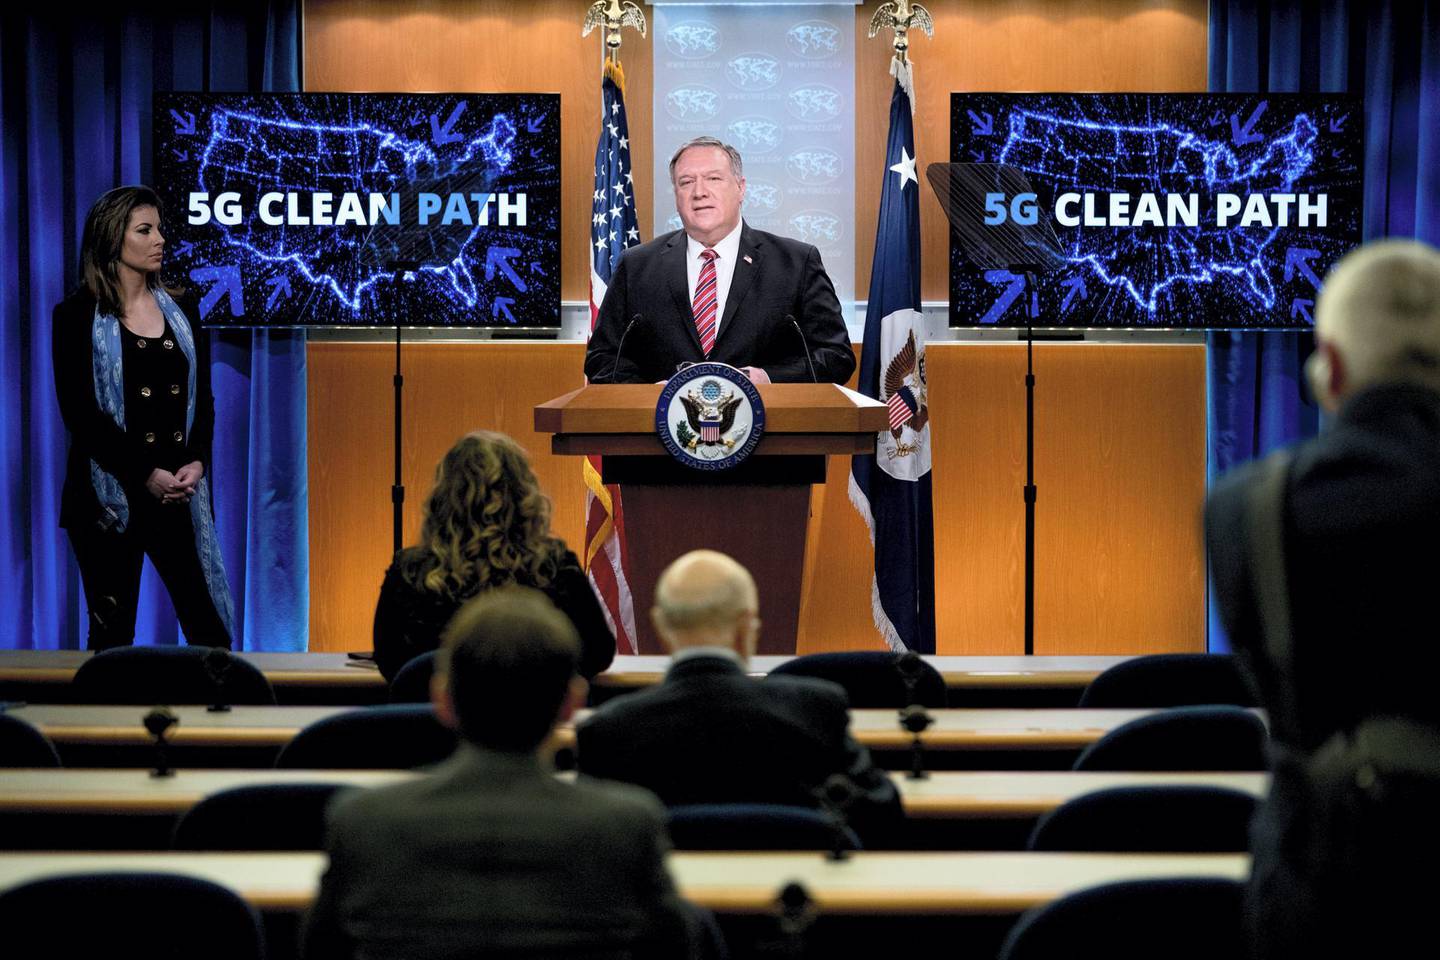 Screens that read “5G Clean Path” with a map of the United States are visible behind Secretary of State Mike Pompeo, accompanied by State Department spokeswoman Morgan Ortagus(L), as he speaks at a news conference at the State Department on April 29, 2020, in Washington,DC. (Photo by Andrew Harnik / POOL / AFP)